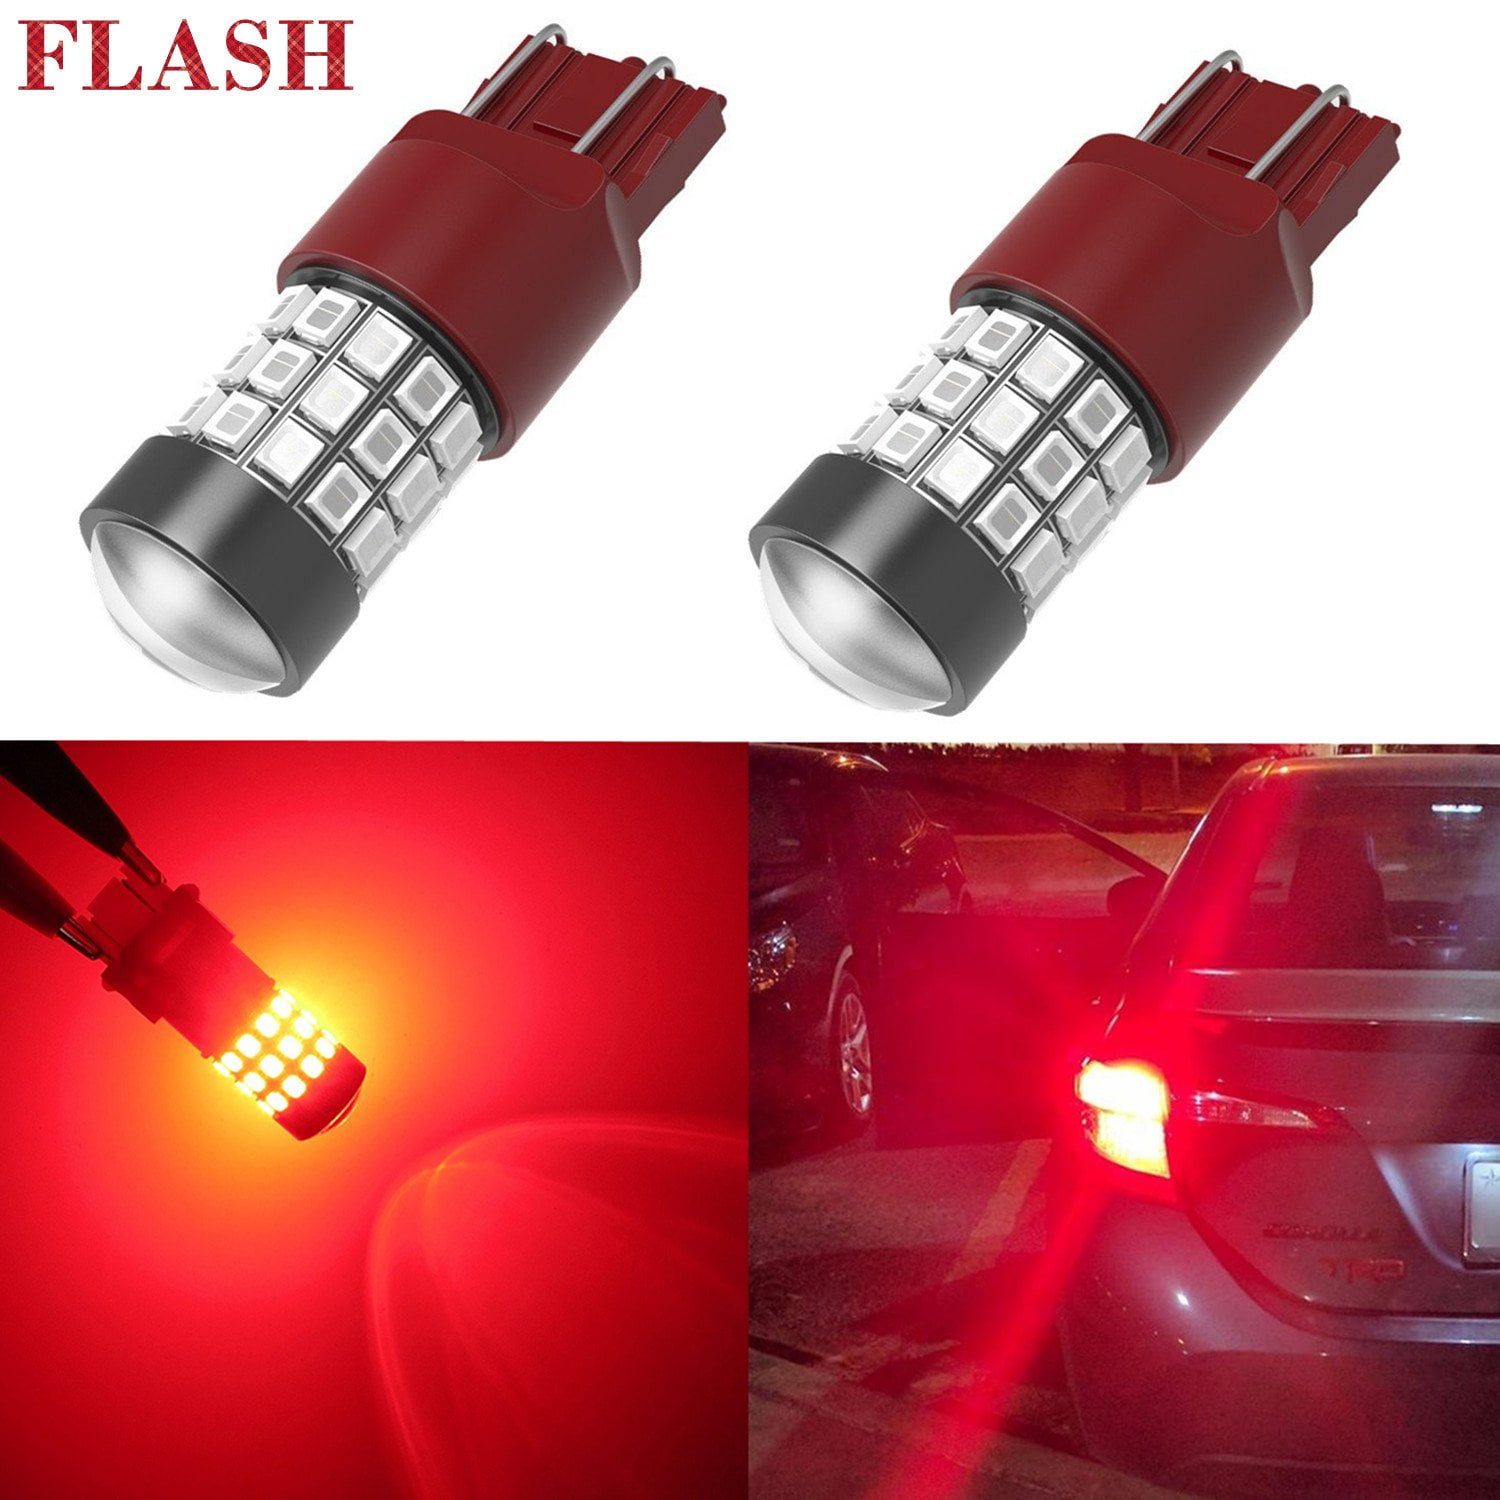 iBrightstar Newest 9-30V Flashing Strobe Blinking Brake Lights 1156 1141 1003 BA15S LED Bulbs with Projector replacement for Tail Brake Stop Lights Brilliant Red